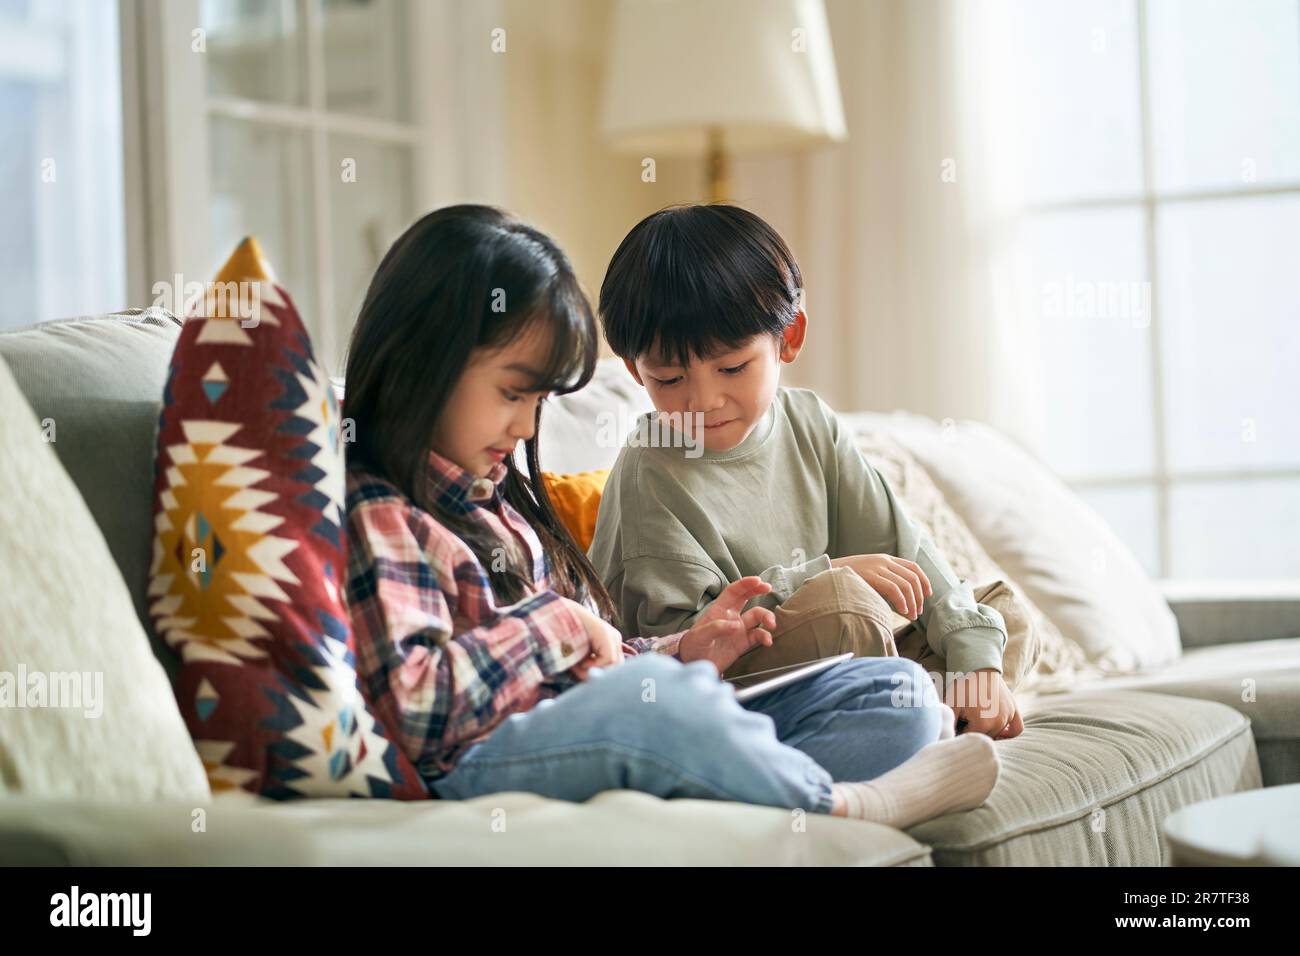 little asian children brother and sister sitting on family couch at home using digital tablet computer together Stock Photo